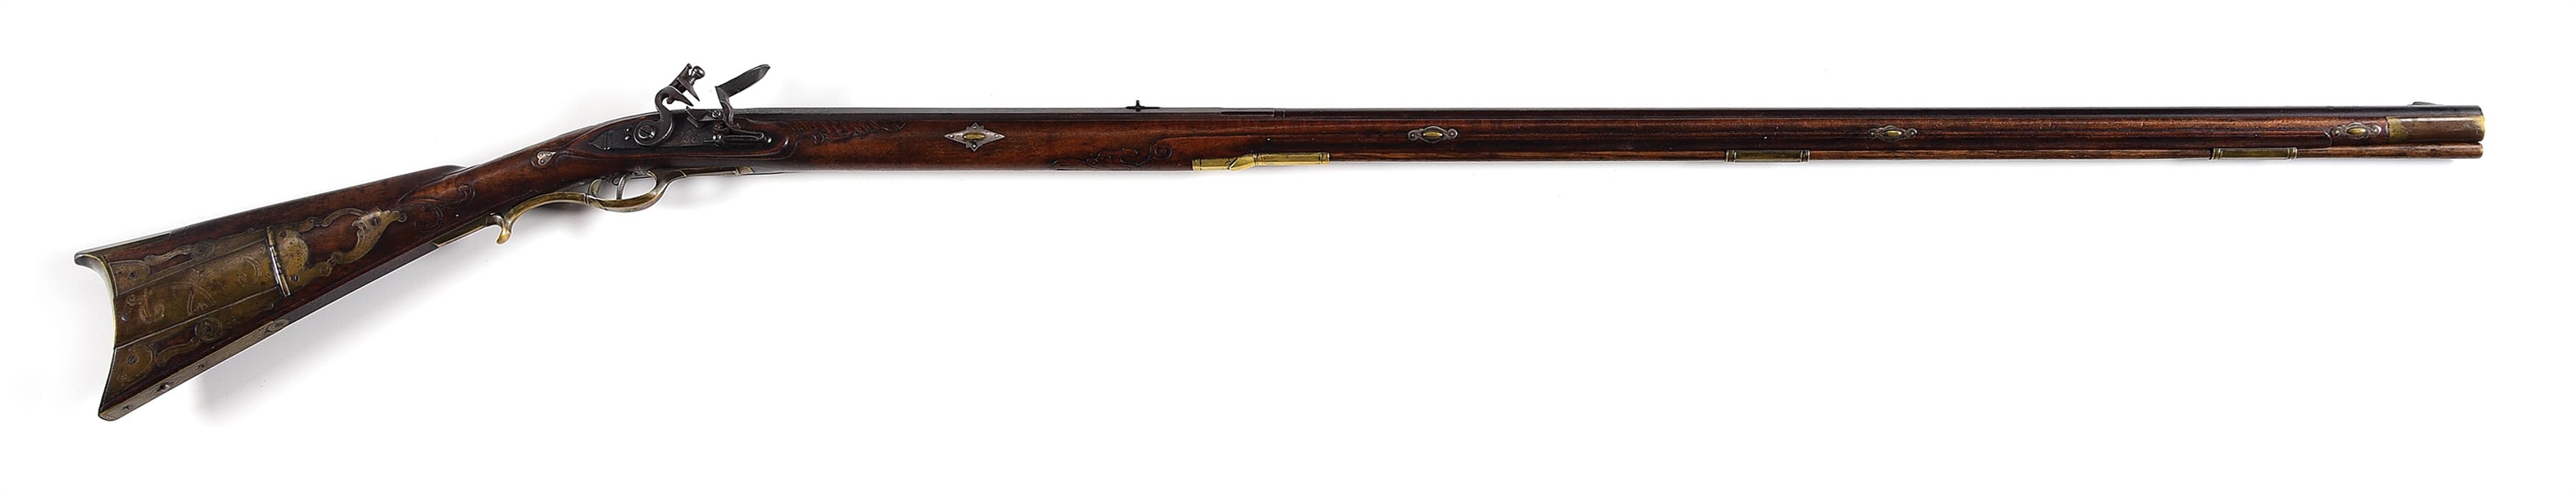 (A) JOHN ARMSTRONG SIGNED FLINTLOCK KENTUCKY RIFLE MASTERFULLY STOCKED BY LOUIE PARKER.